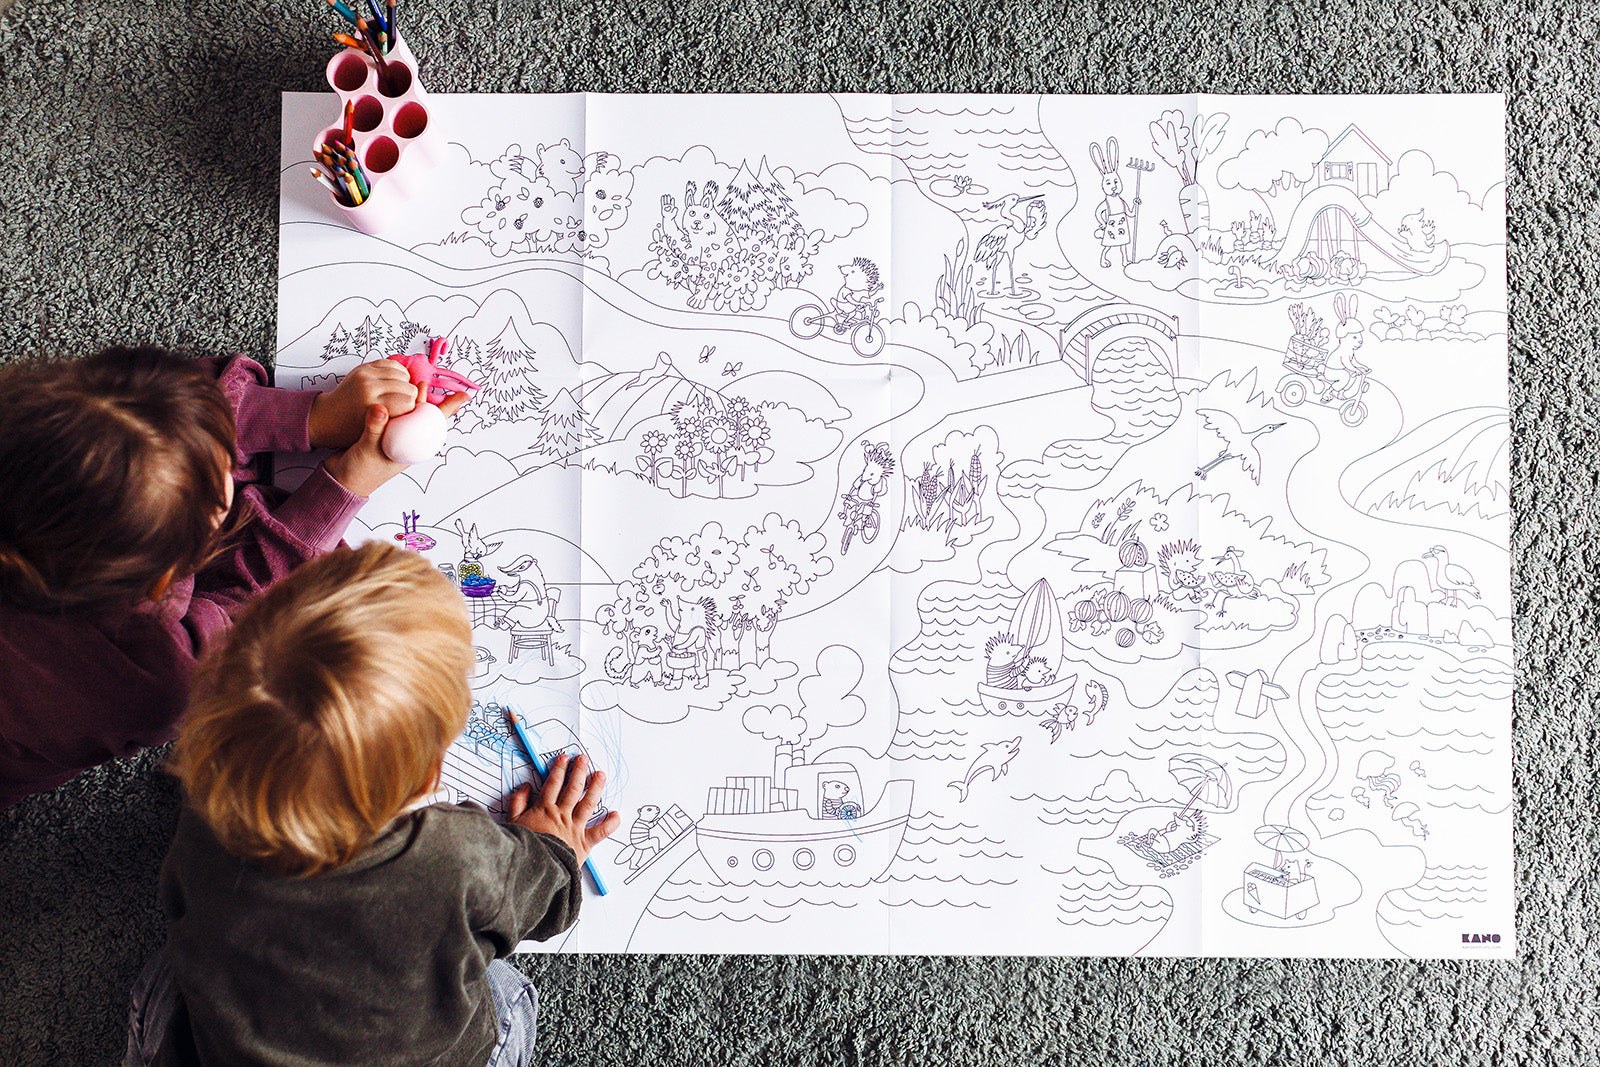 XXL Nature and animals coloring poster by Irina Kostyshina, ISBN 9789934899324, a brother and a sister coloring the poster